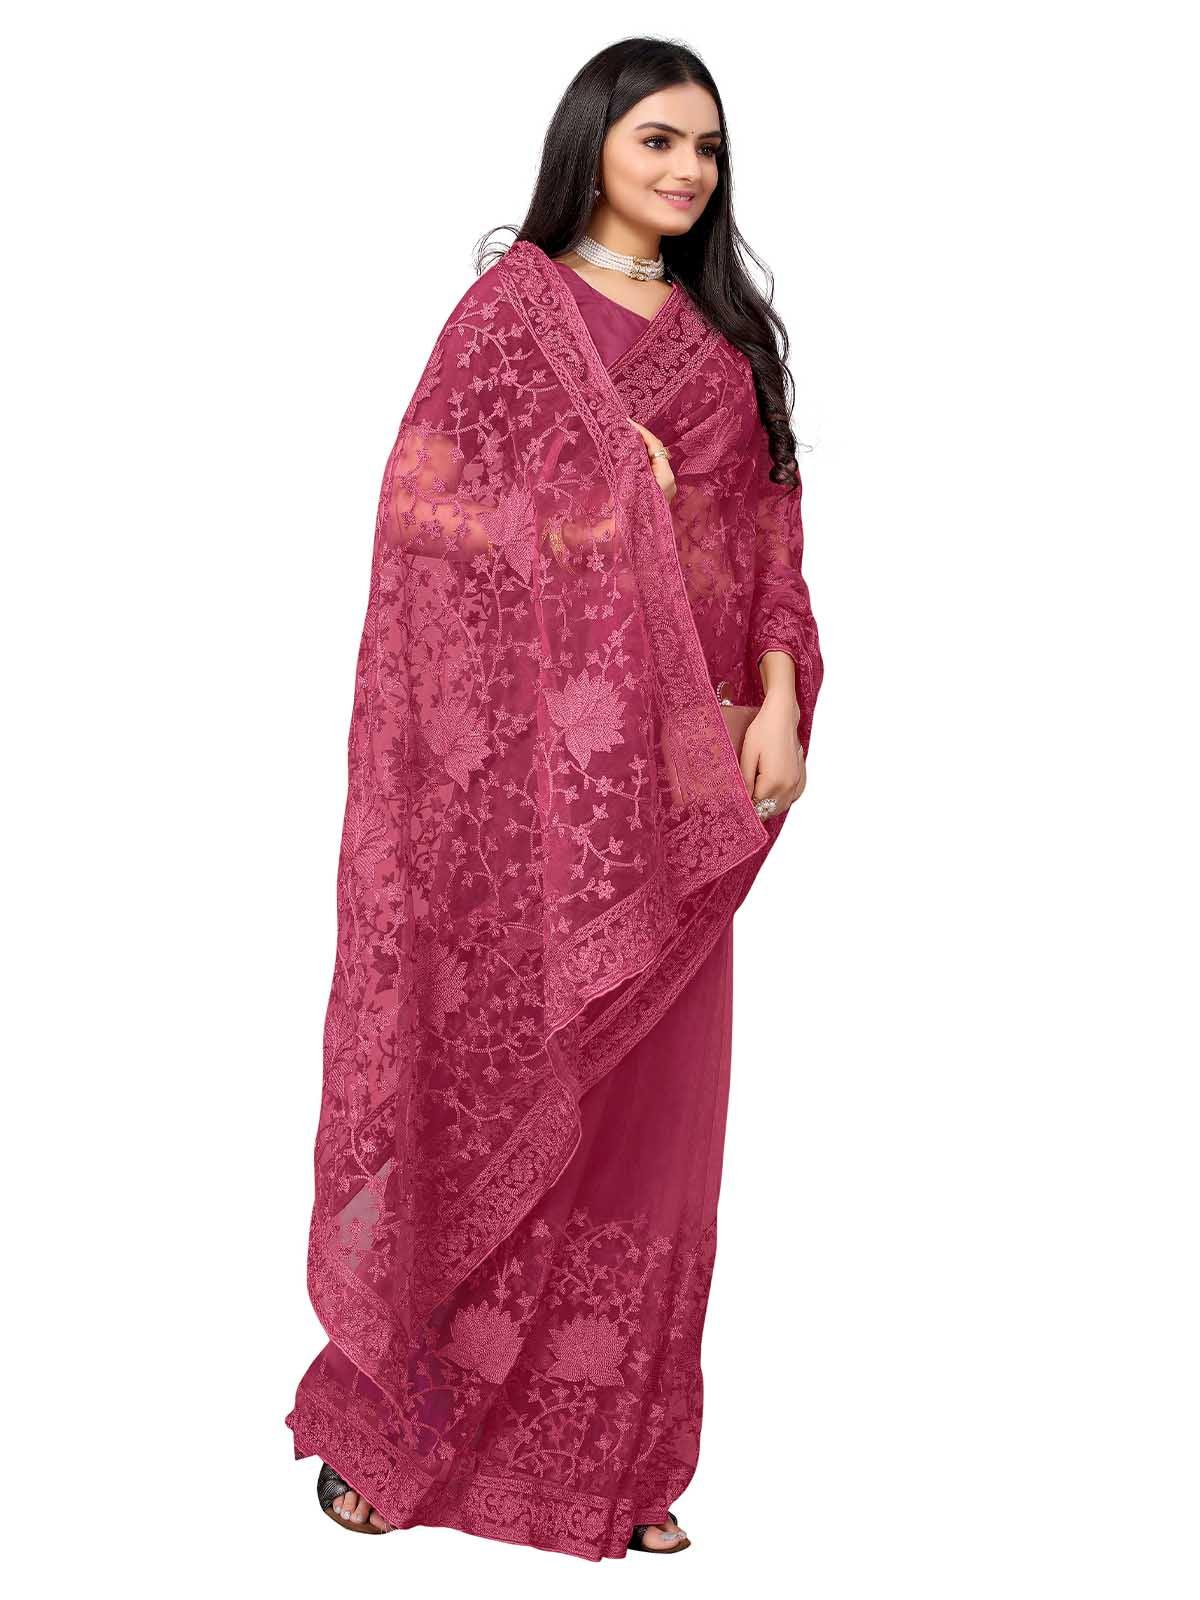 Women's Rust Red Net Embroidered Saree With Blouse - Odette